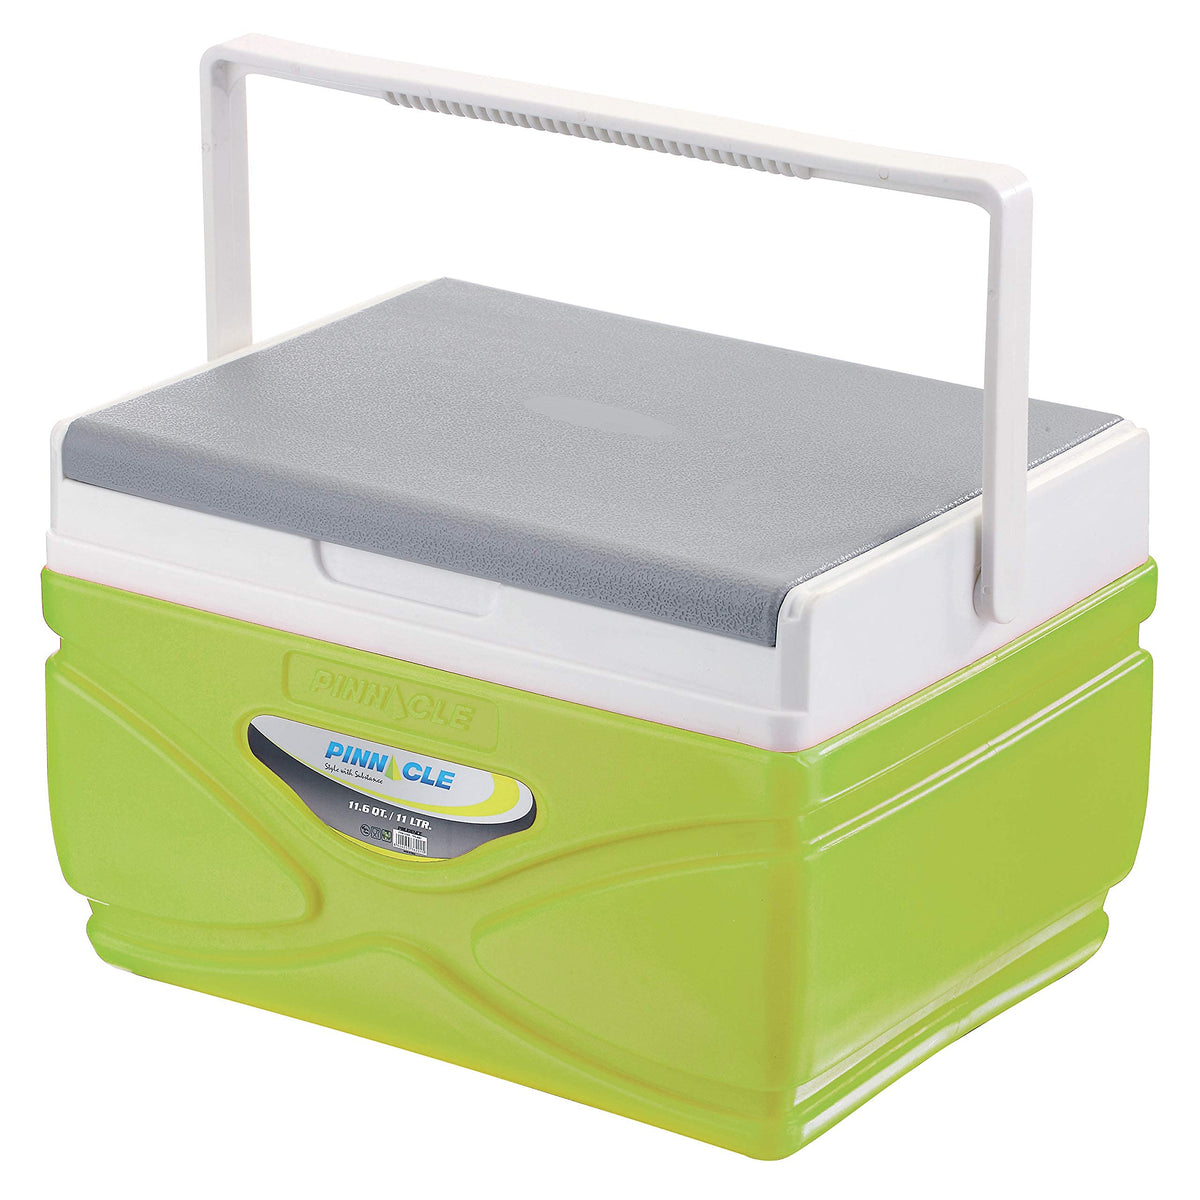 Pinnacle Prudence Ice Box with Soft Touch Handle Keeps Cold Upto 48 Hours (11 litres) (Green)